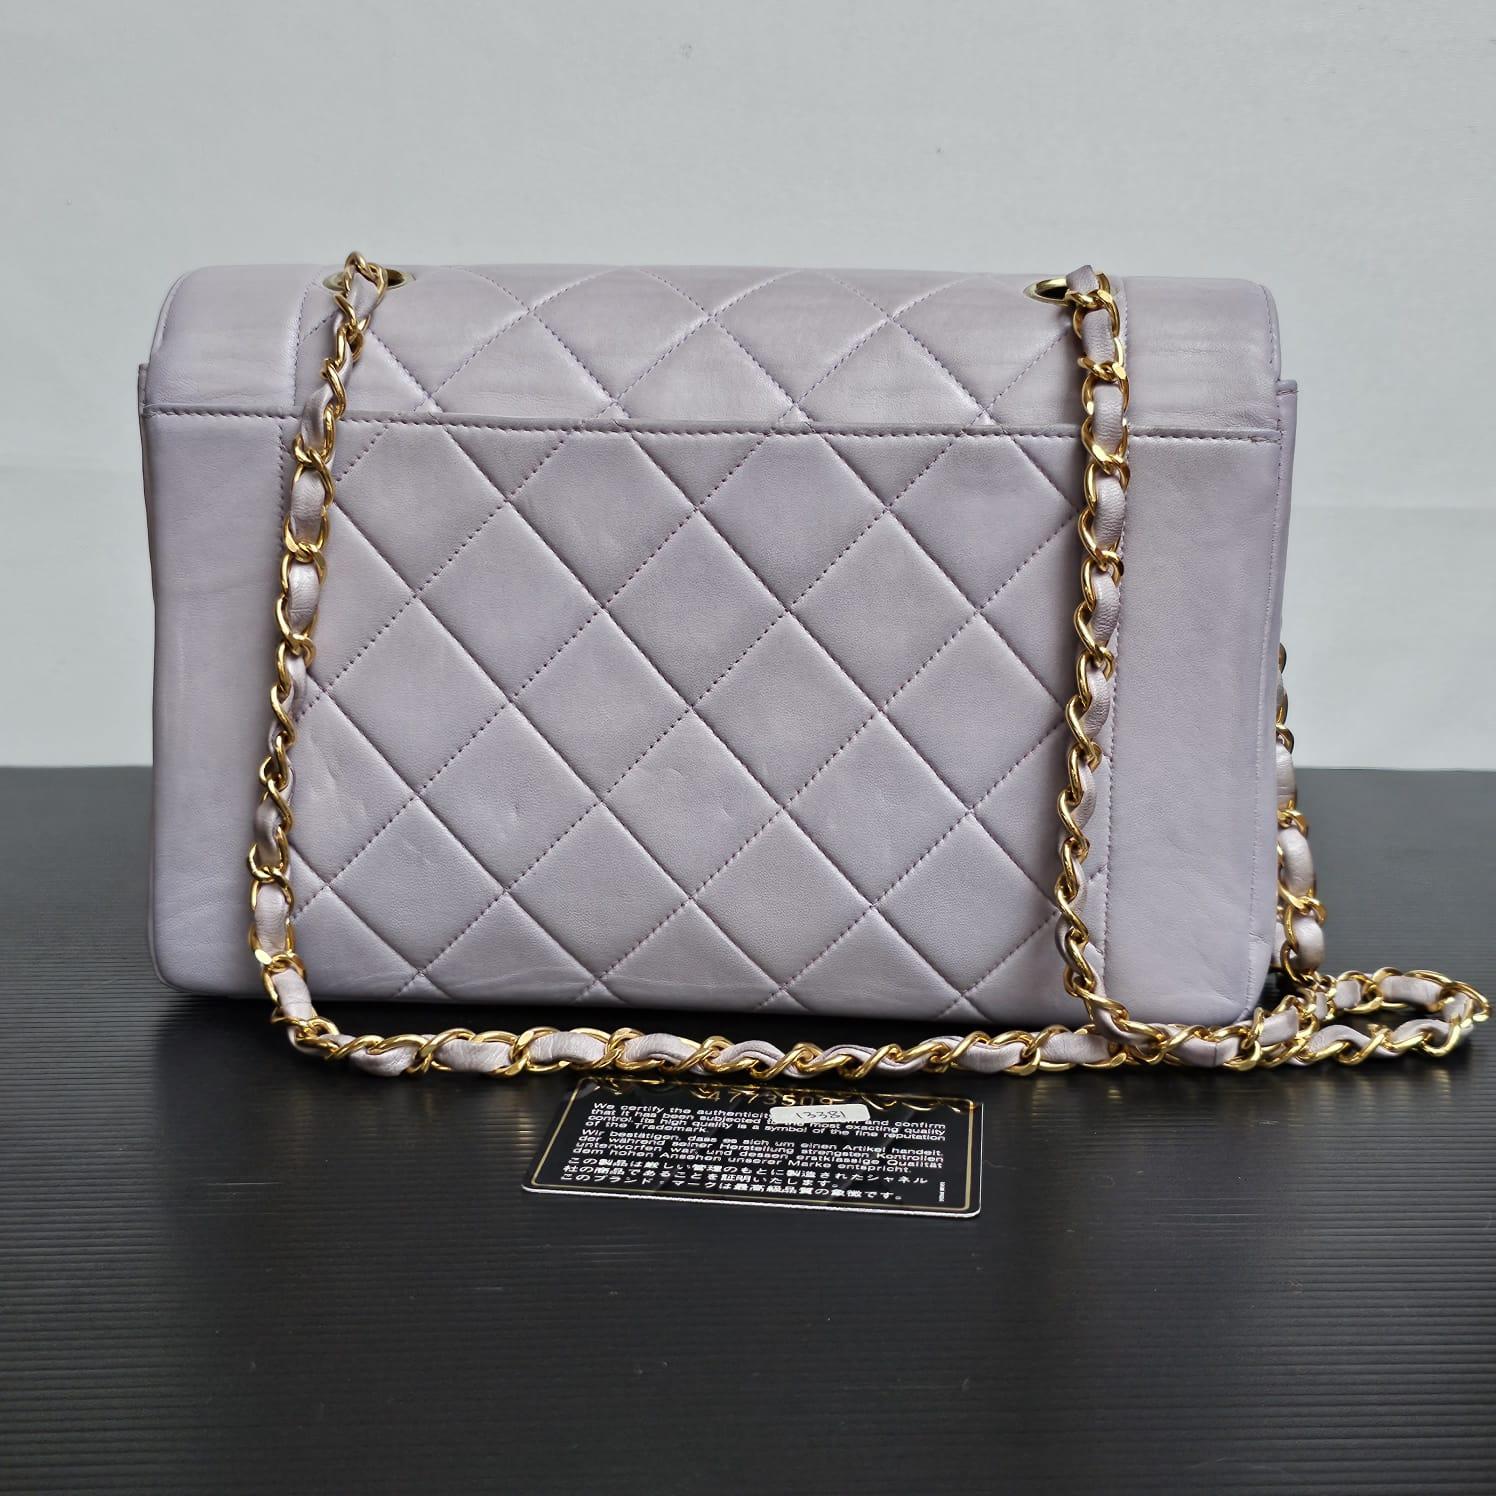 Rare Vintage Chanel Medium Lilac Lambskin Quilted Diana Flap Bag 1